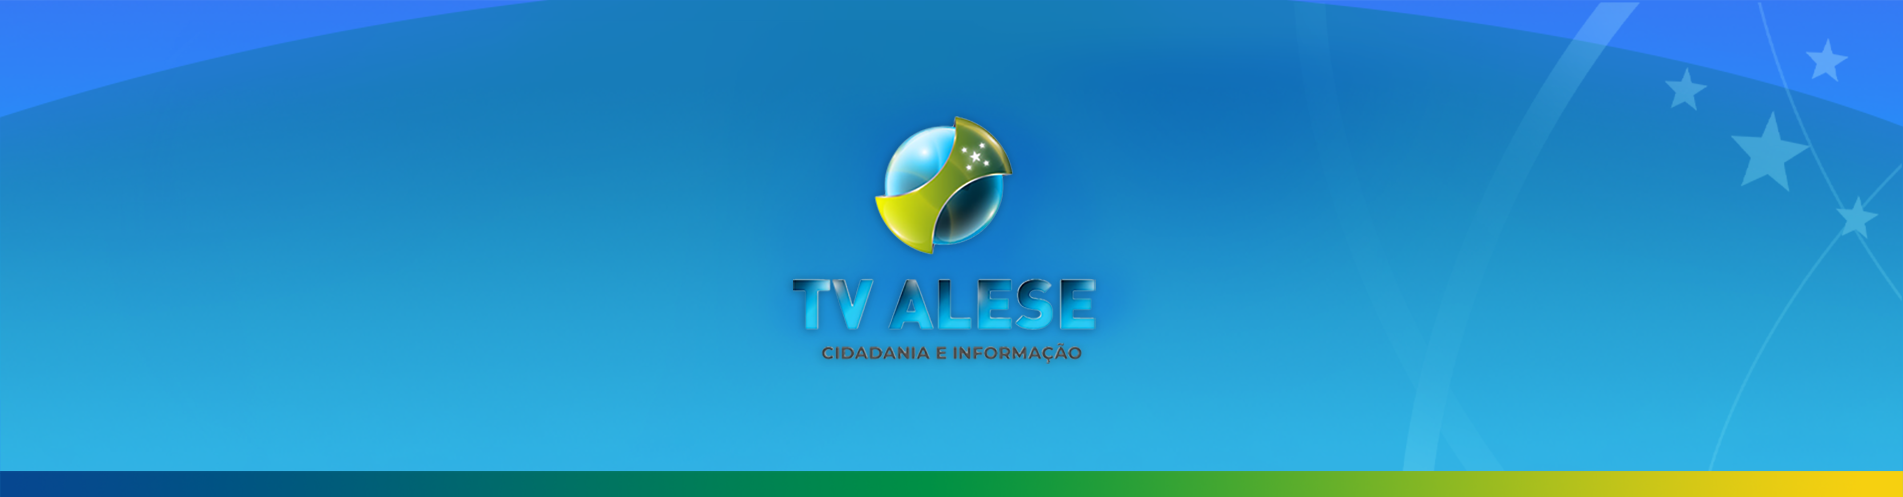 TV ALESE